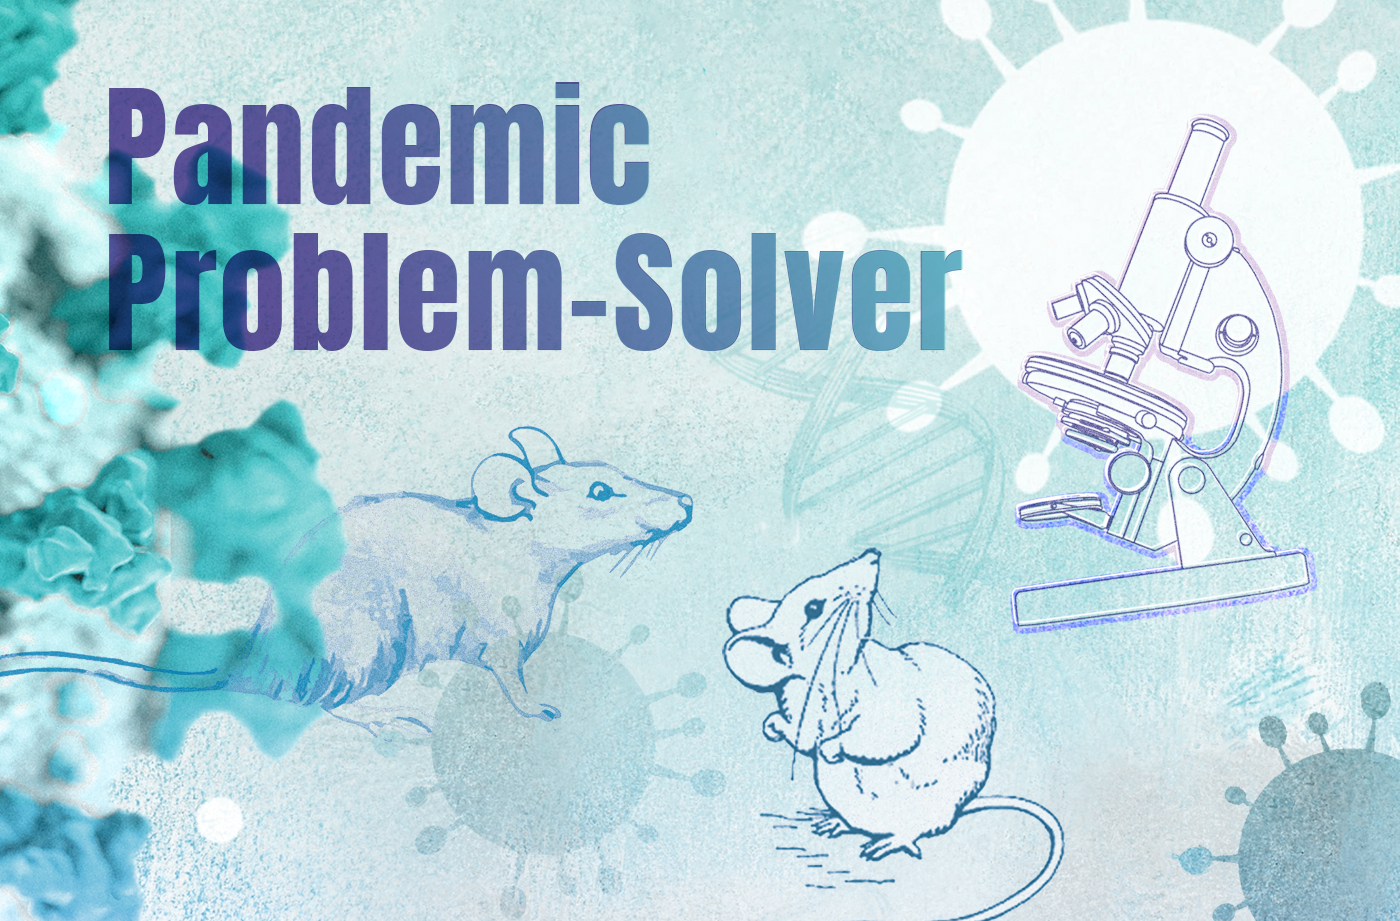 The words Pandemic Problem Solver are overlaid over an illustration of mice, cells, and a microscope.